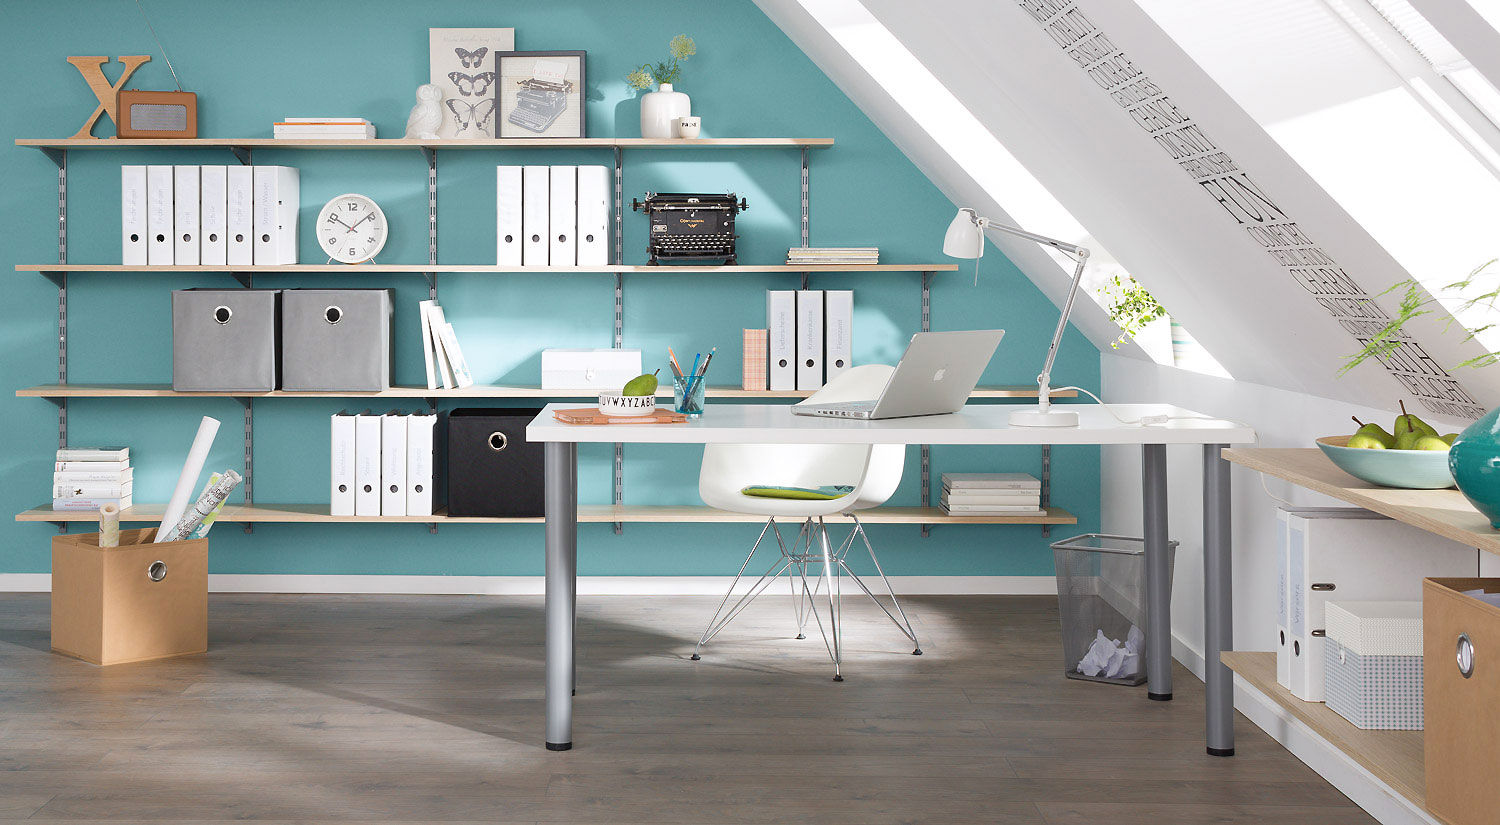 P-SLOT - Wall Shelving System homify Industrial style study/office Home Office,Shelving System,Storage,Office